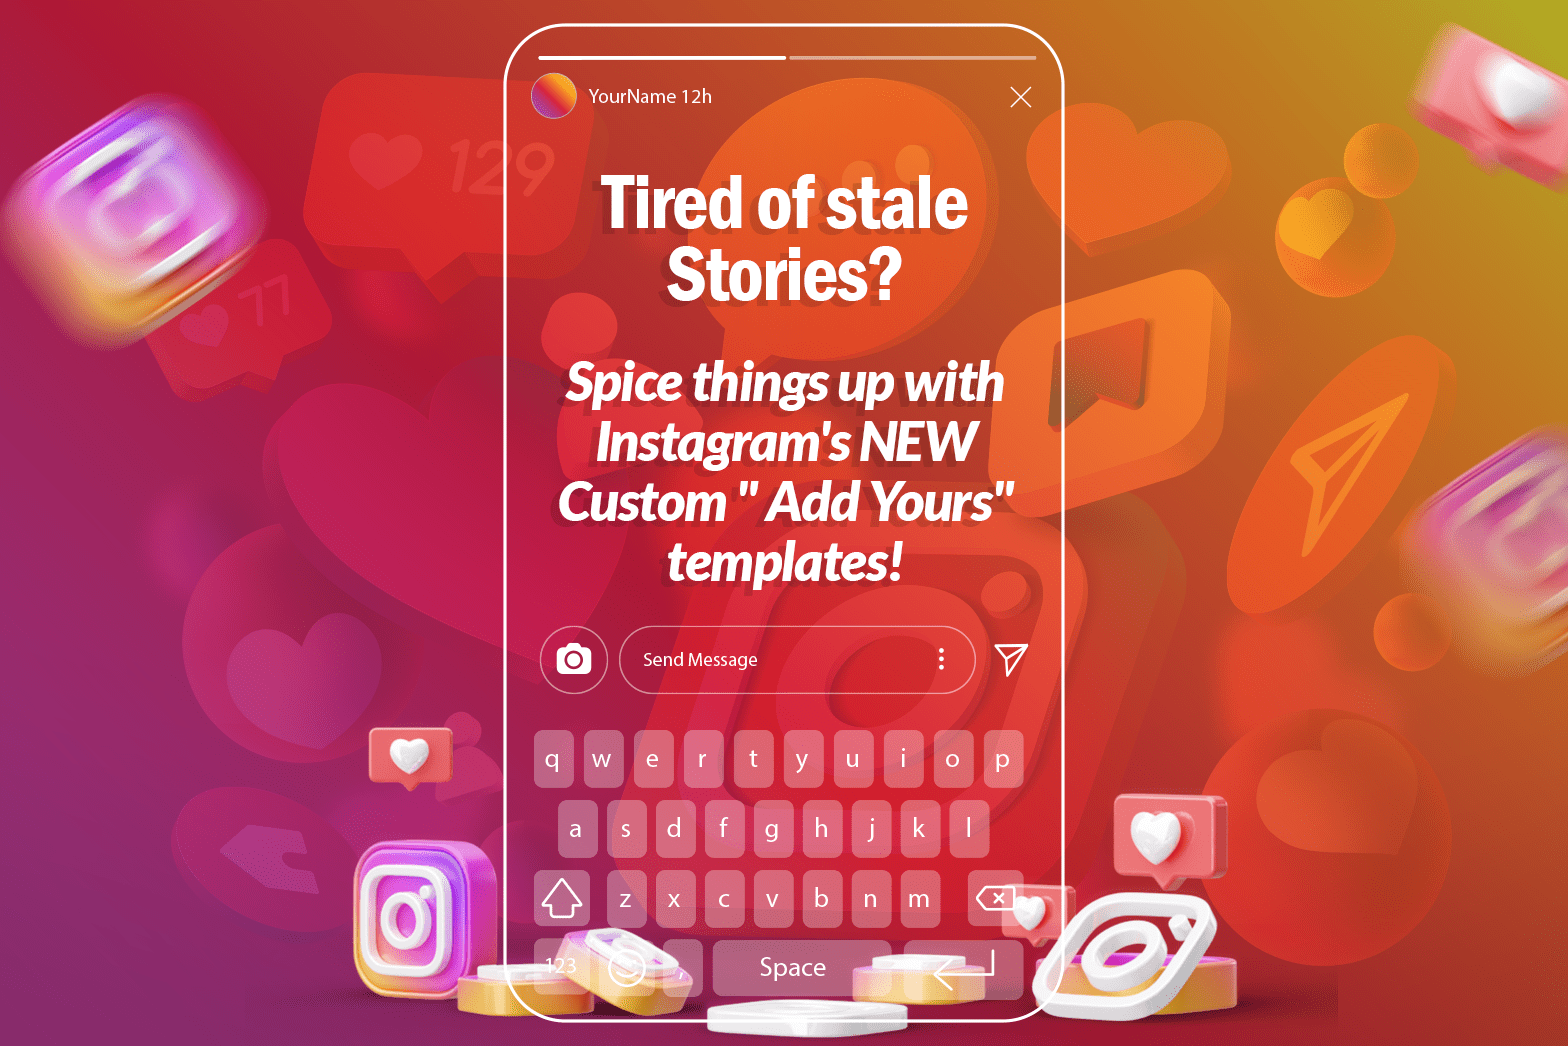 Tired of stale Stories? Spice things up with Instagram’s NEW custom “Add Yours” templates